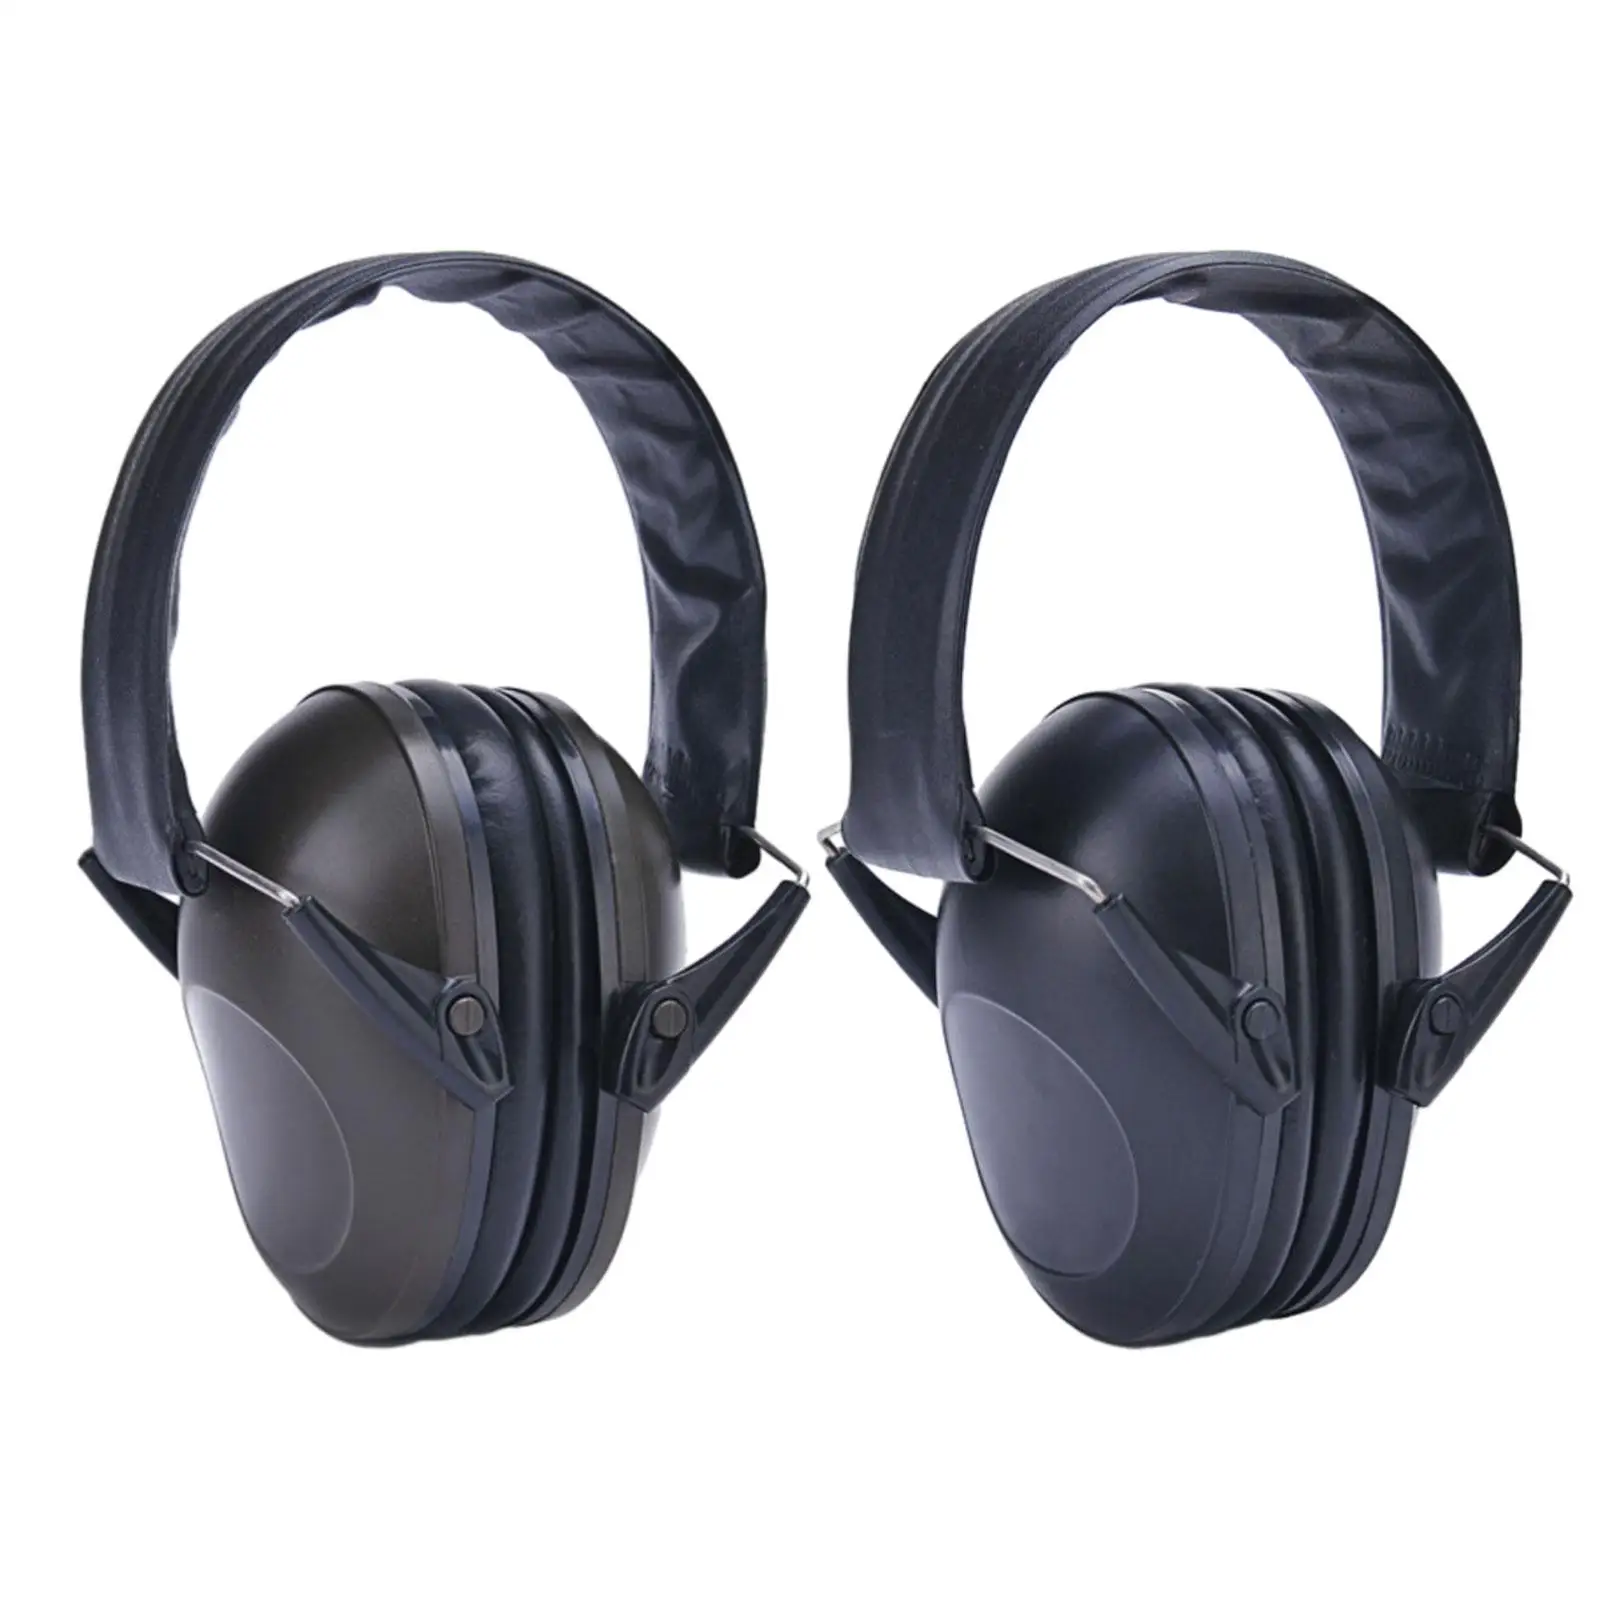 Hearing Protection Noise Cancelling Compact Ear Defenders Ear Protector for Concerts Wood Work Construction Lawn Mowing Sleeping